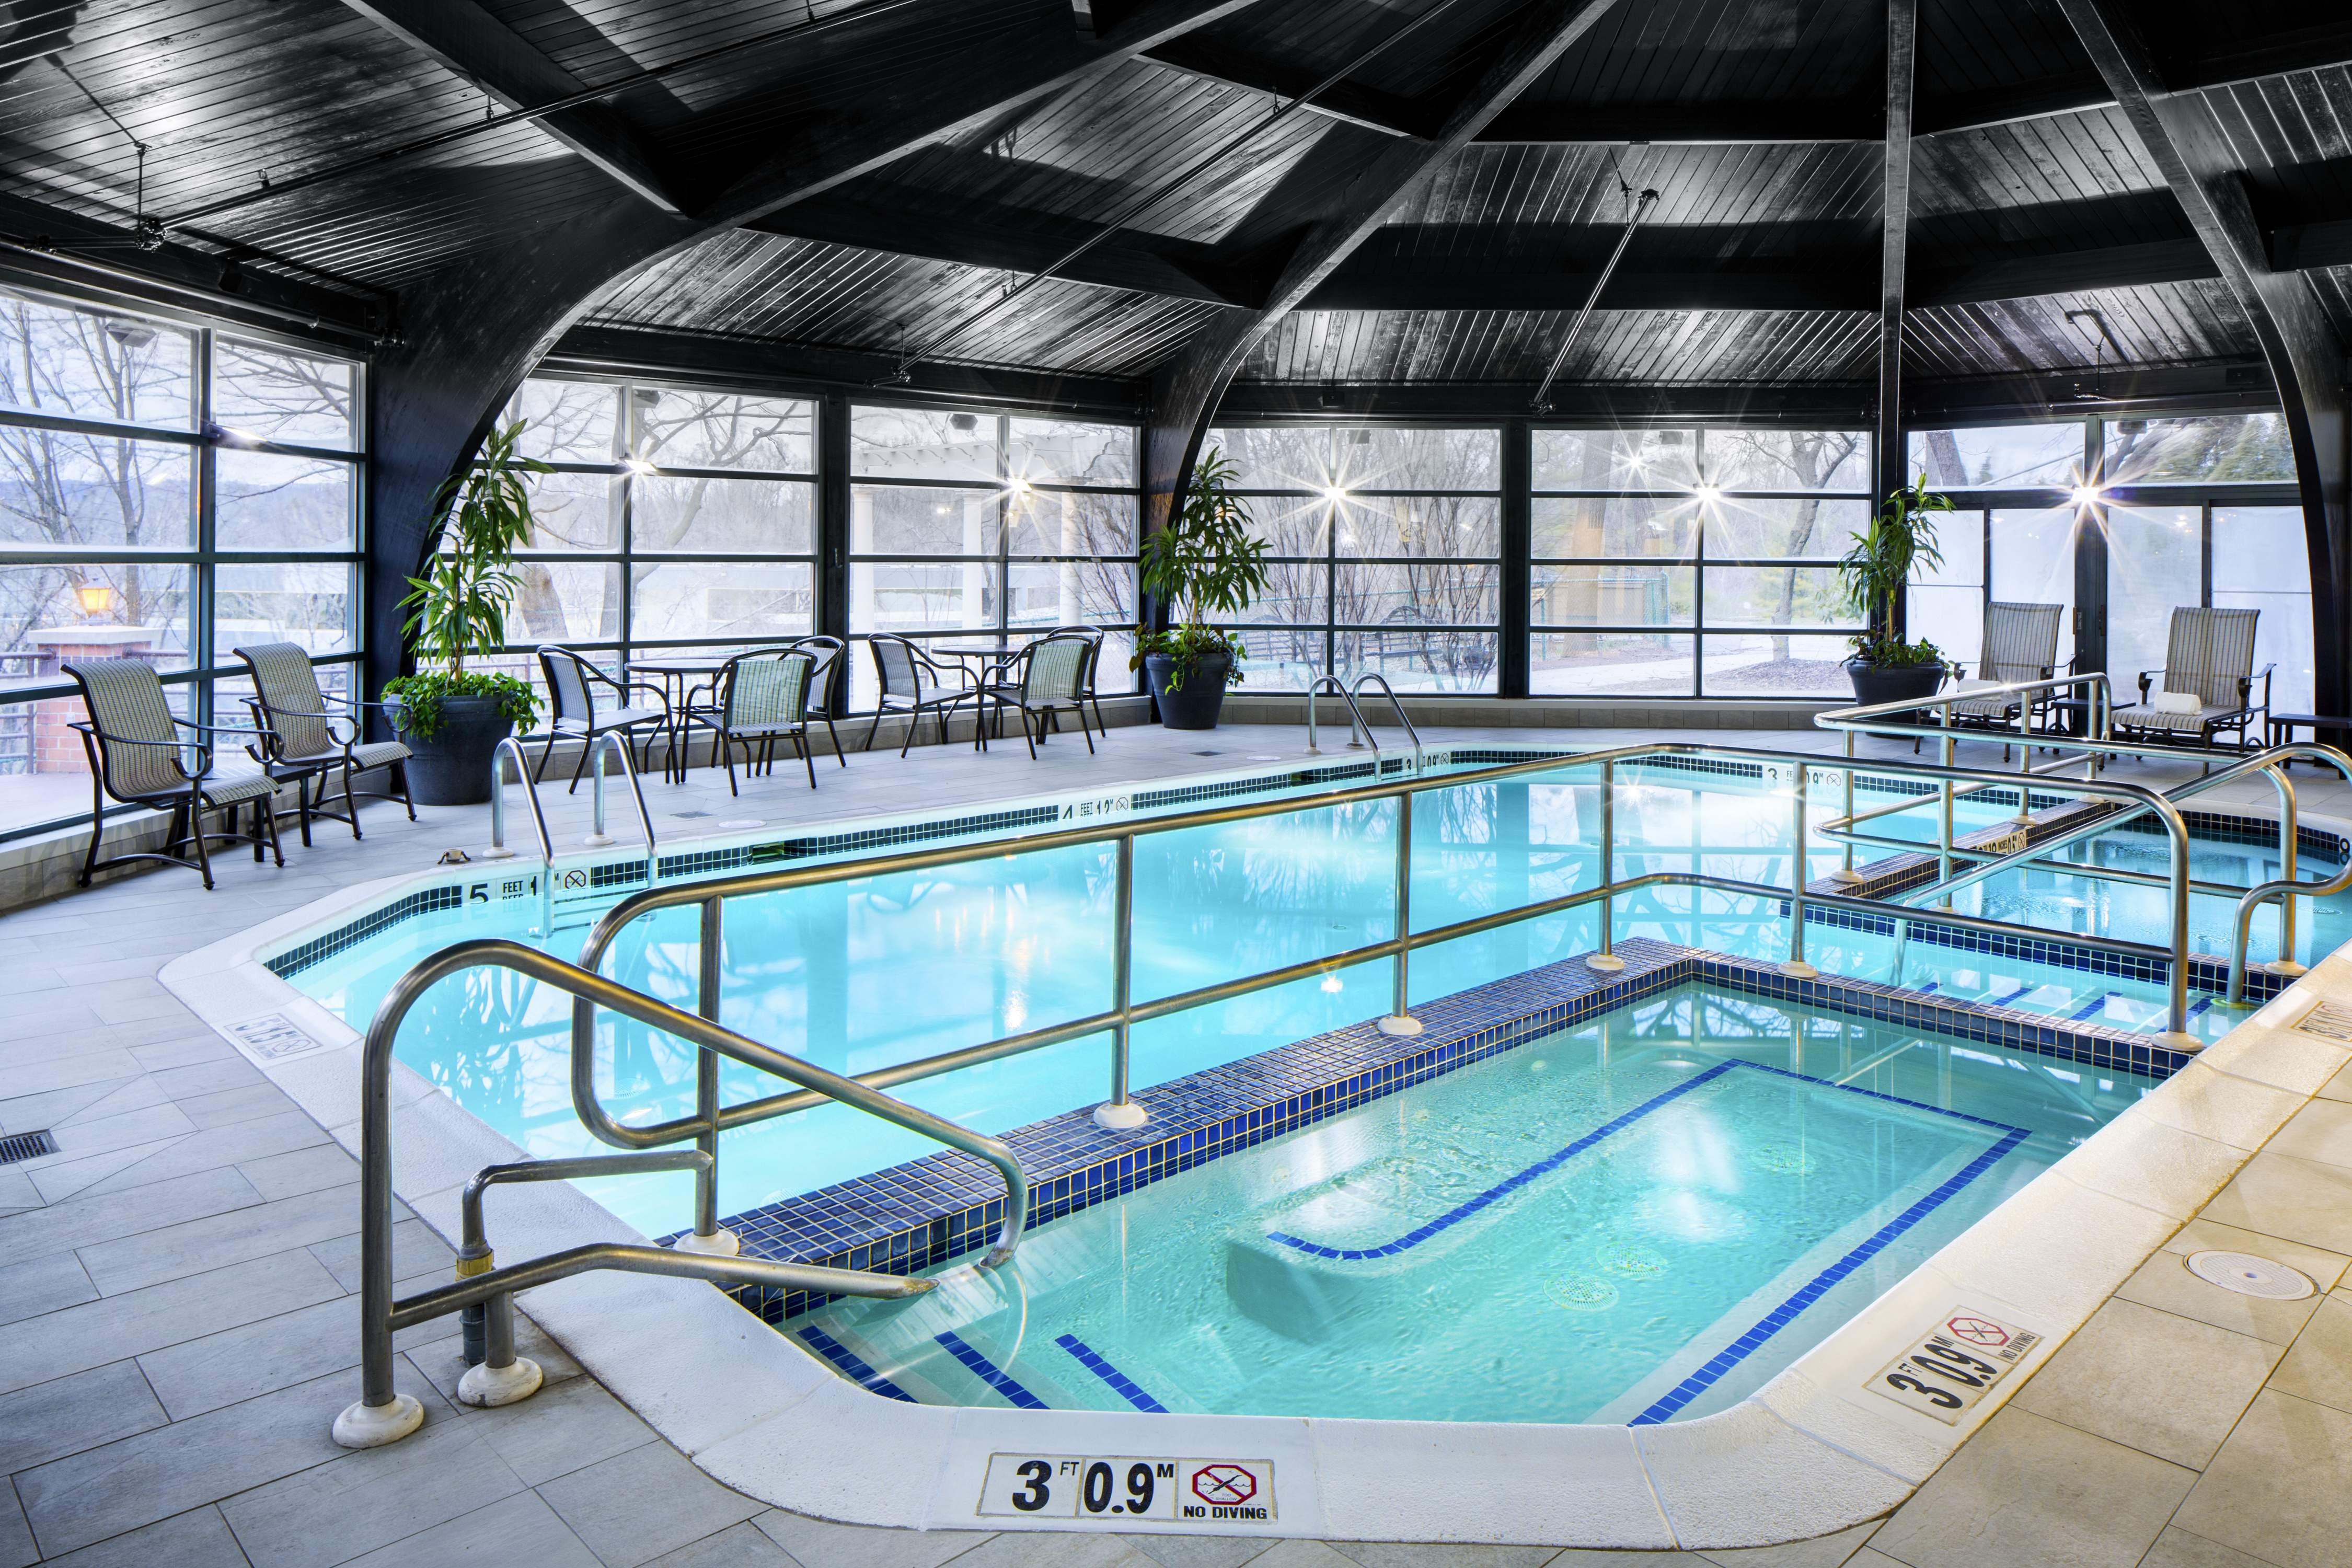 Indoor Pool, whirlpool and baby pool